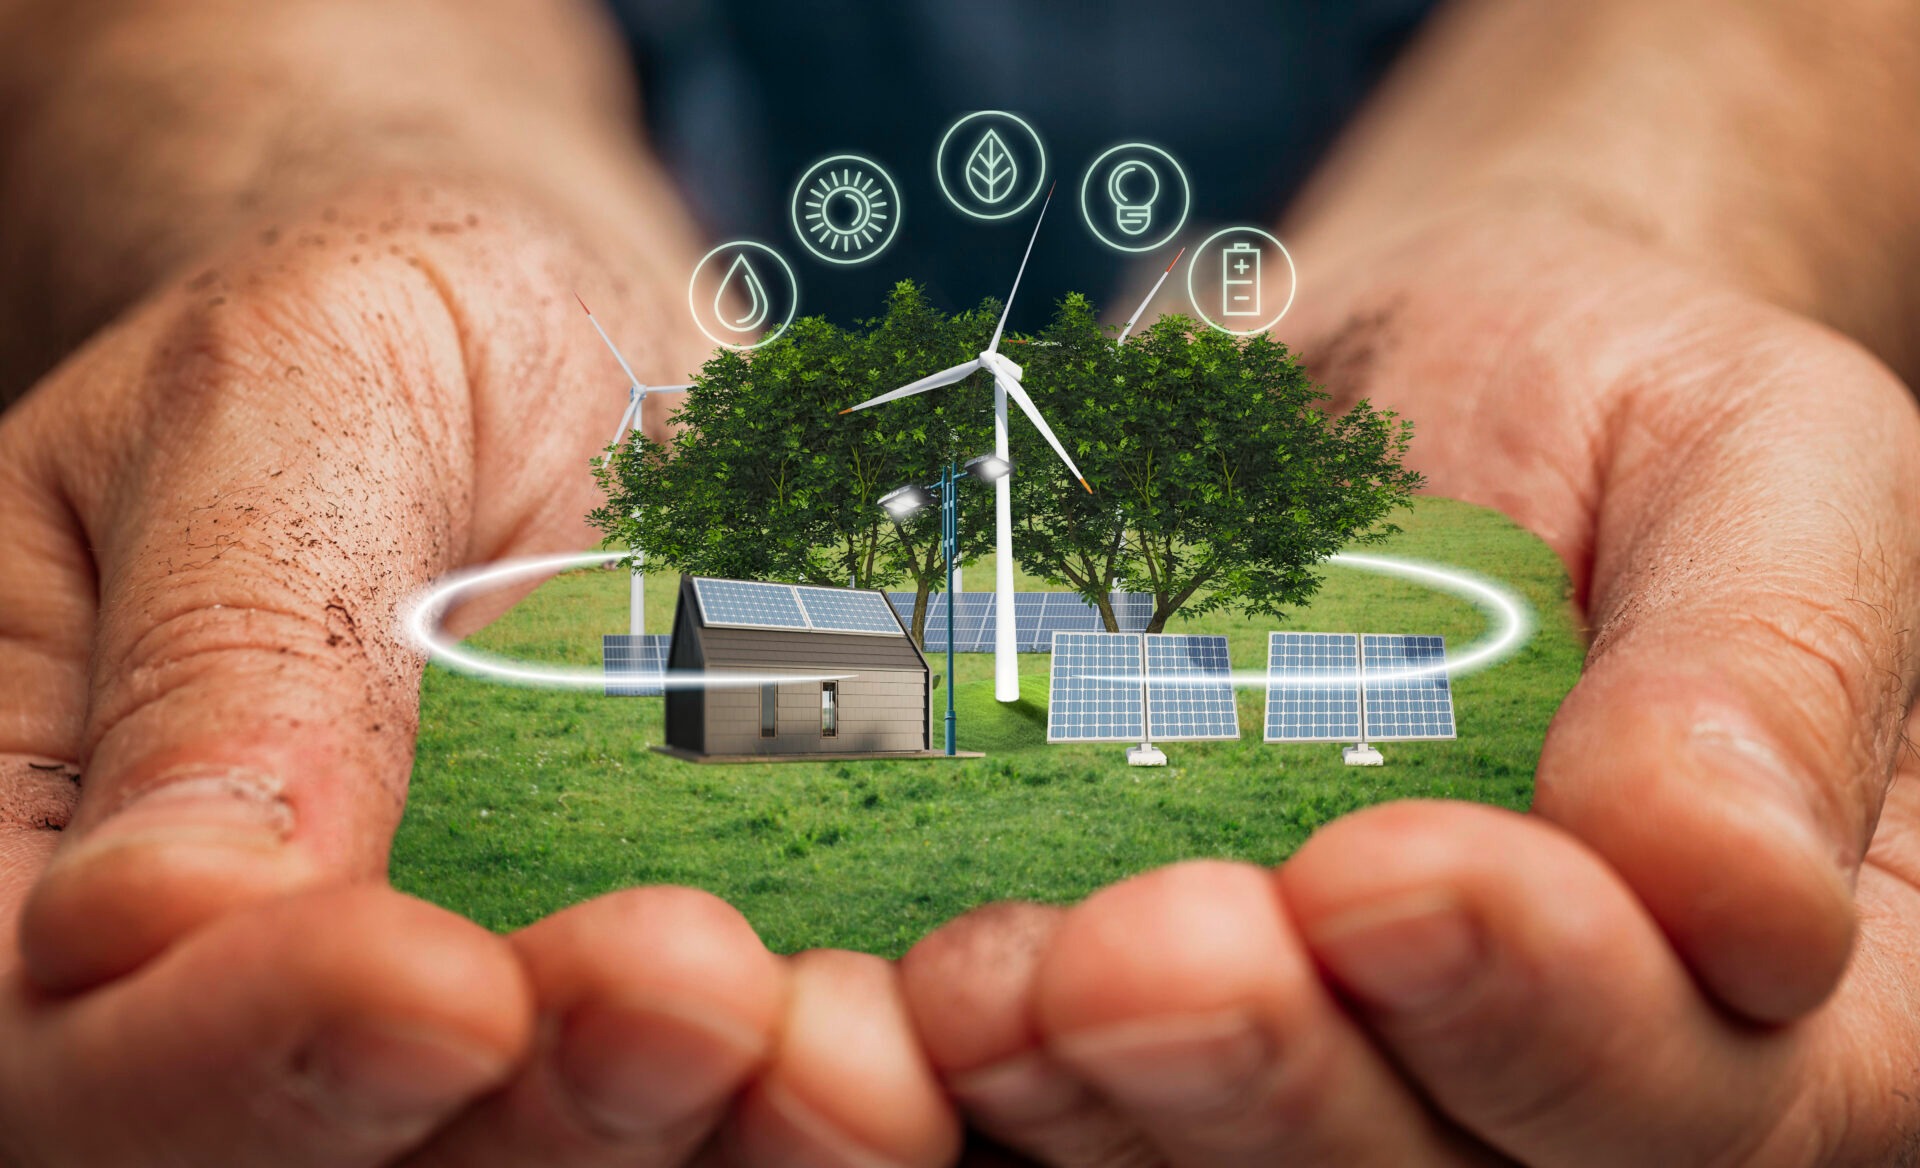 Green Tech Sustainability Solutions for a Changing World